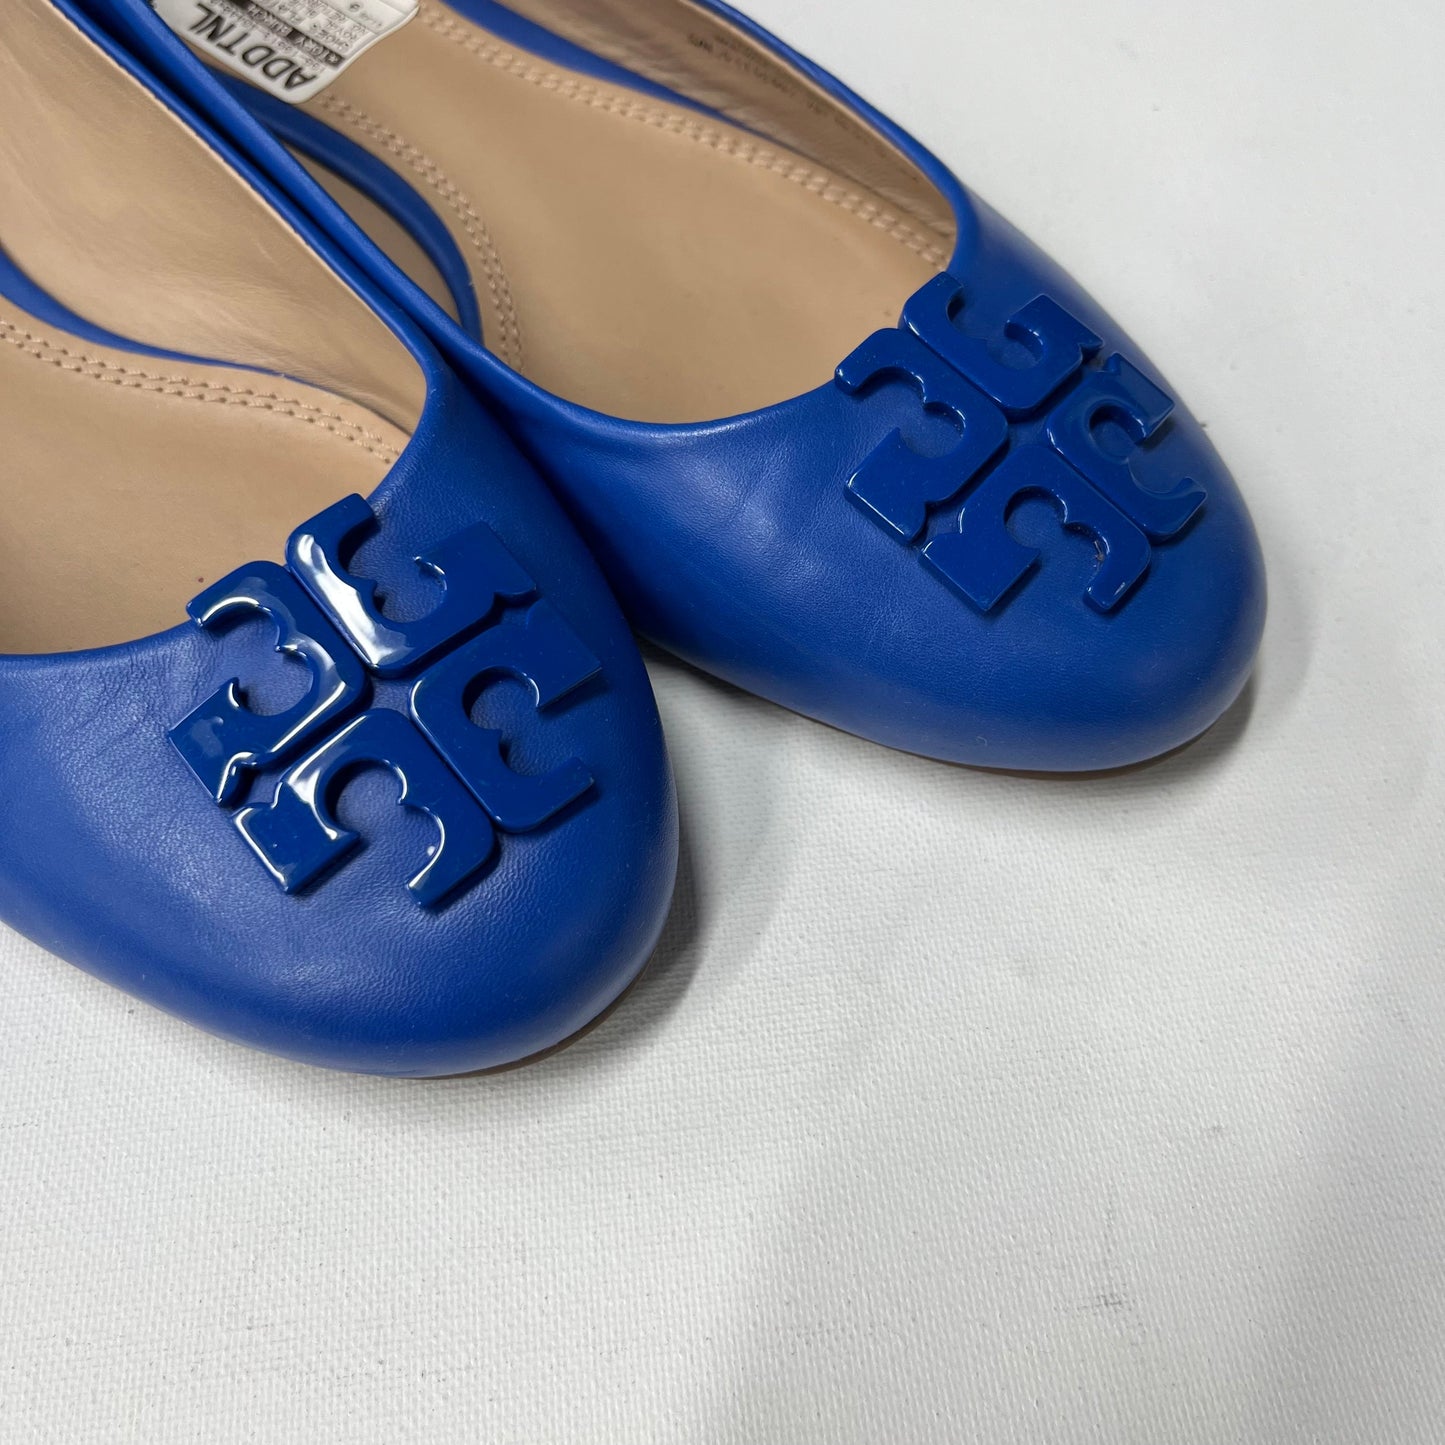 Shoes Flats Ballet By Tory Burch  Size: 9.5